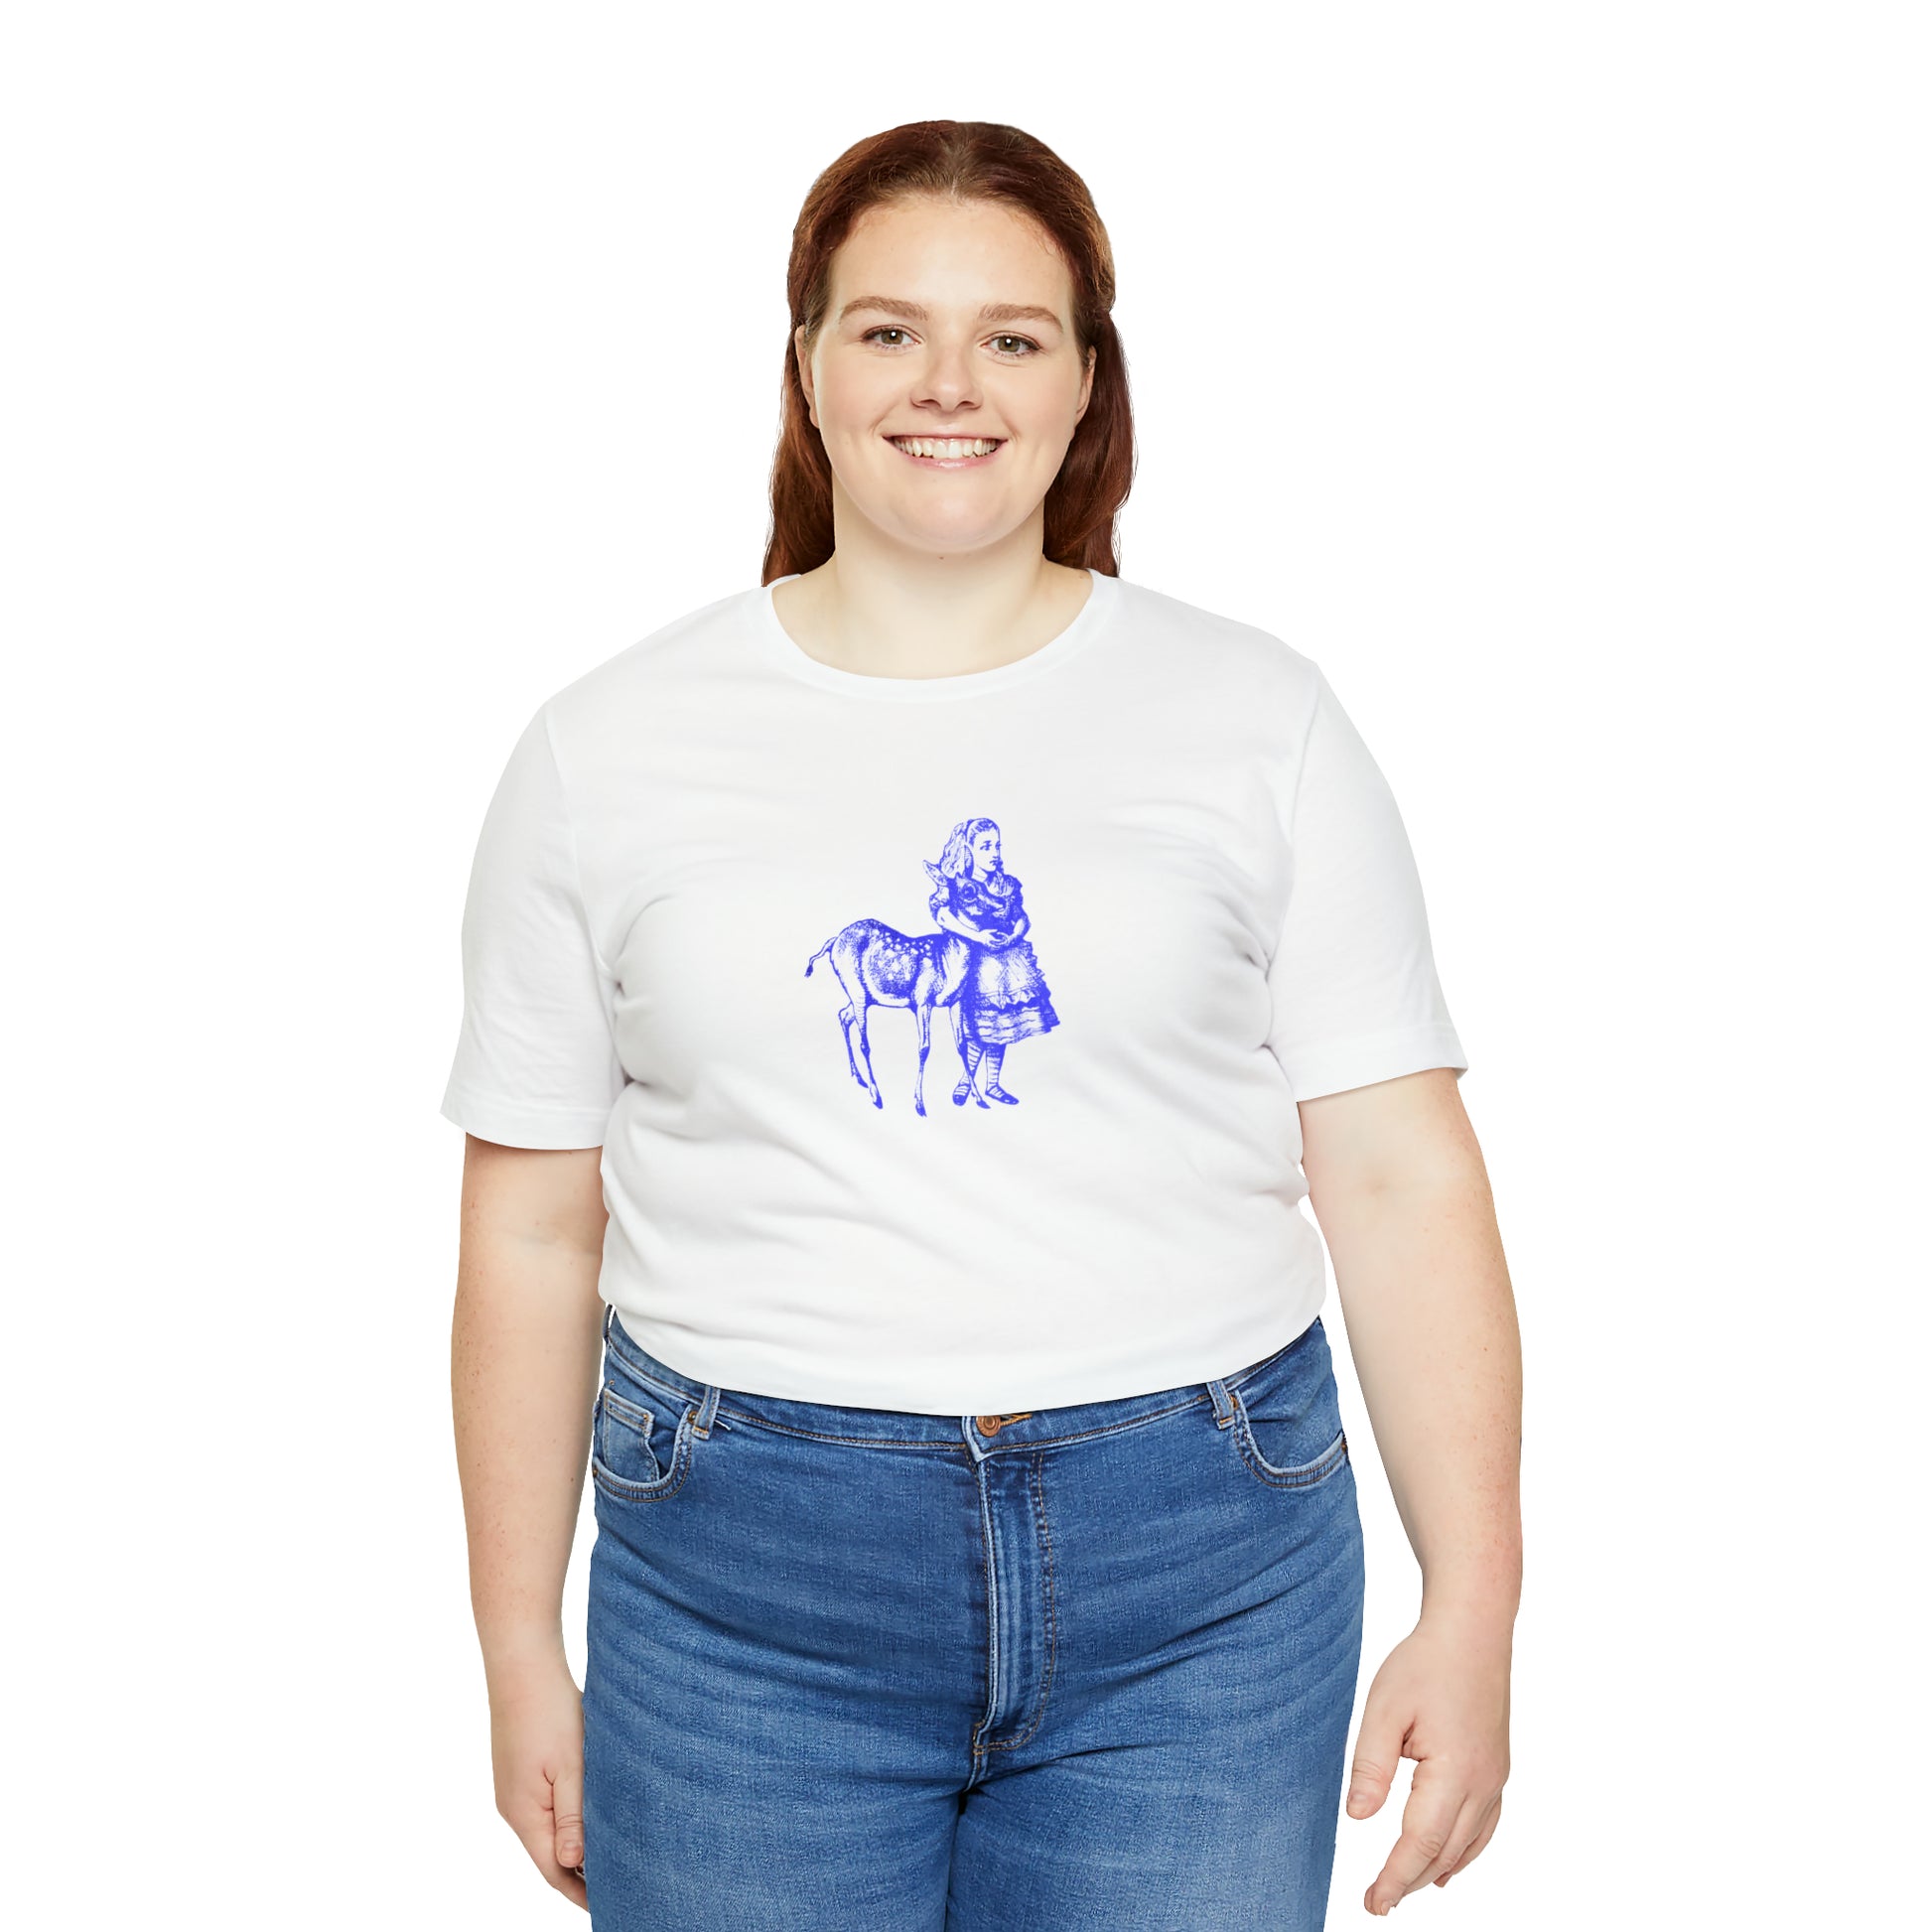 A smiling plus sized woman wearing a white t-shirt with an illustration of Alice in Wonderland and a baby deer printed in blue.